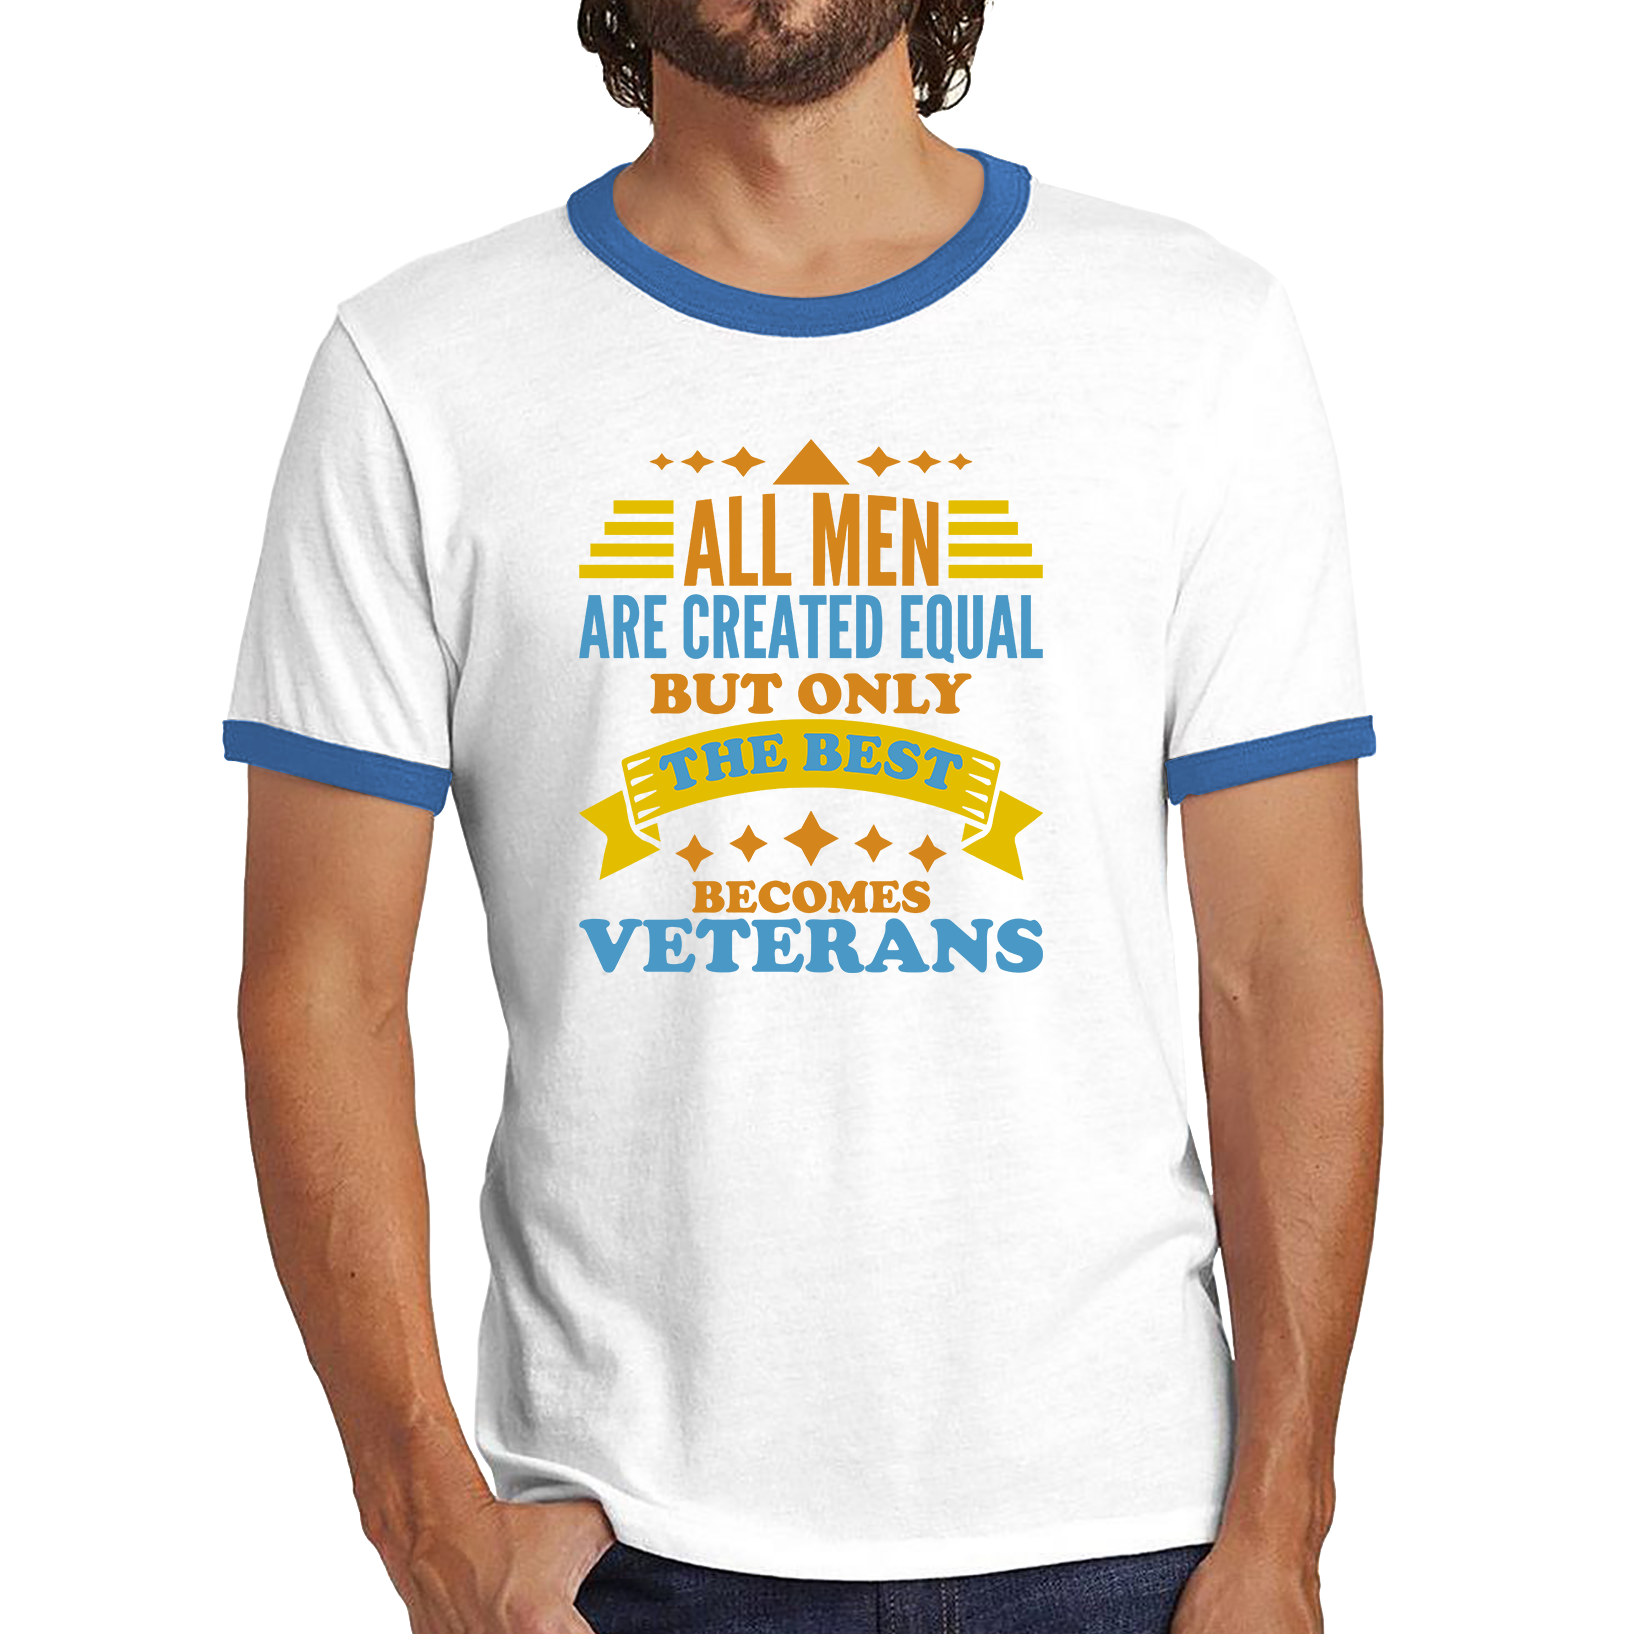 All Men Are Created Equal But Only The Best Becomes Veterans Ringer T Shirt